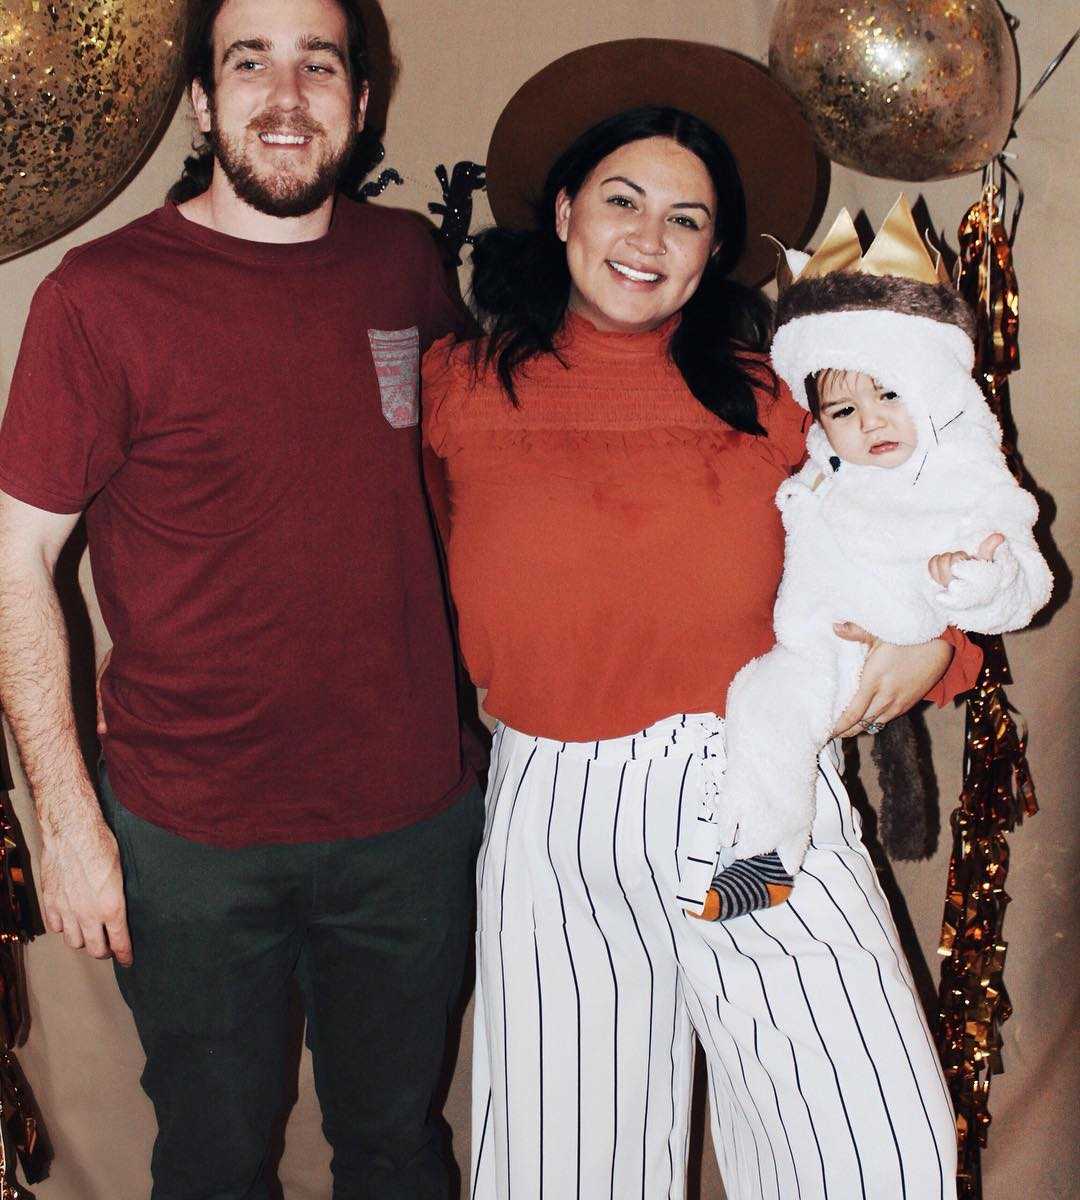 woman struggling with postpartum depression smiles in picture holding baby in costume next to husband